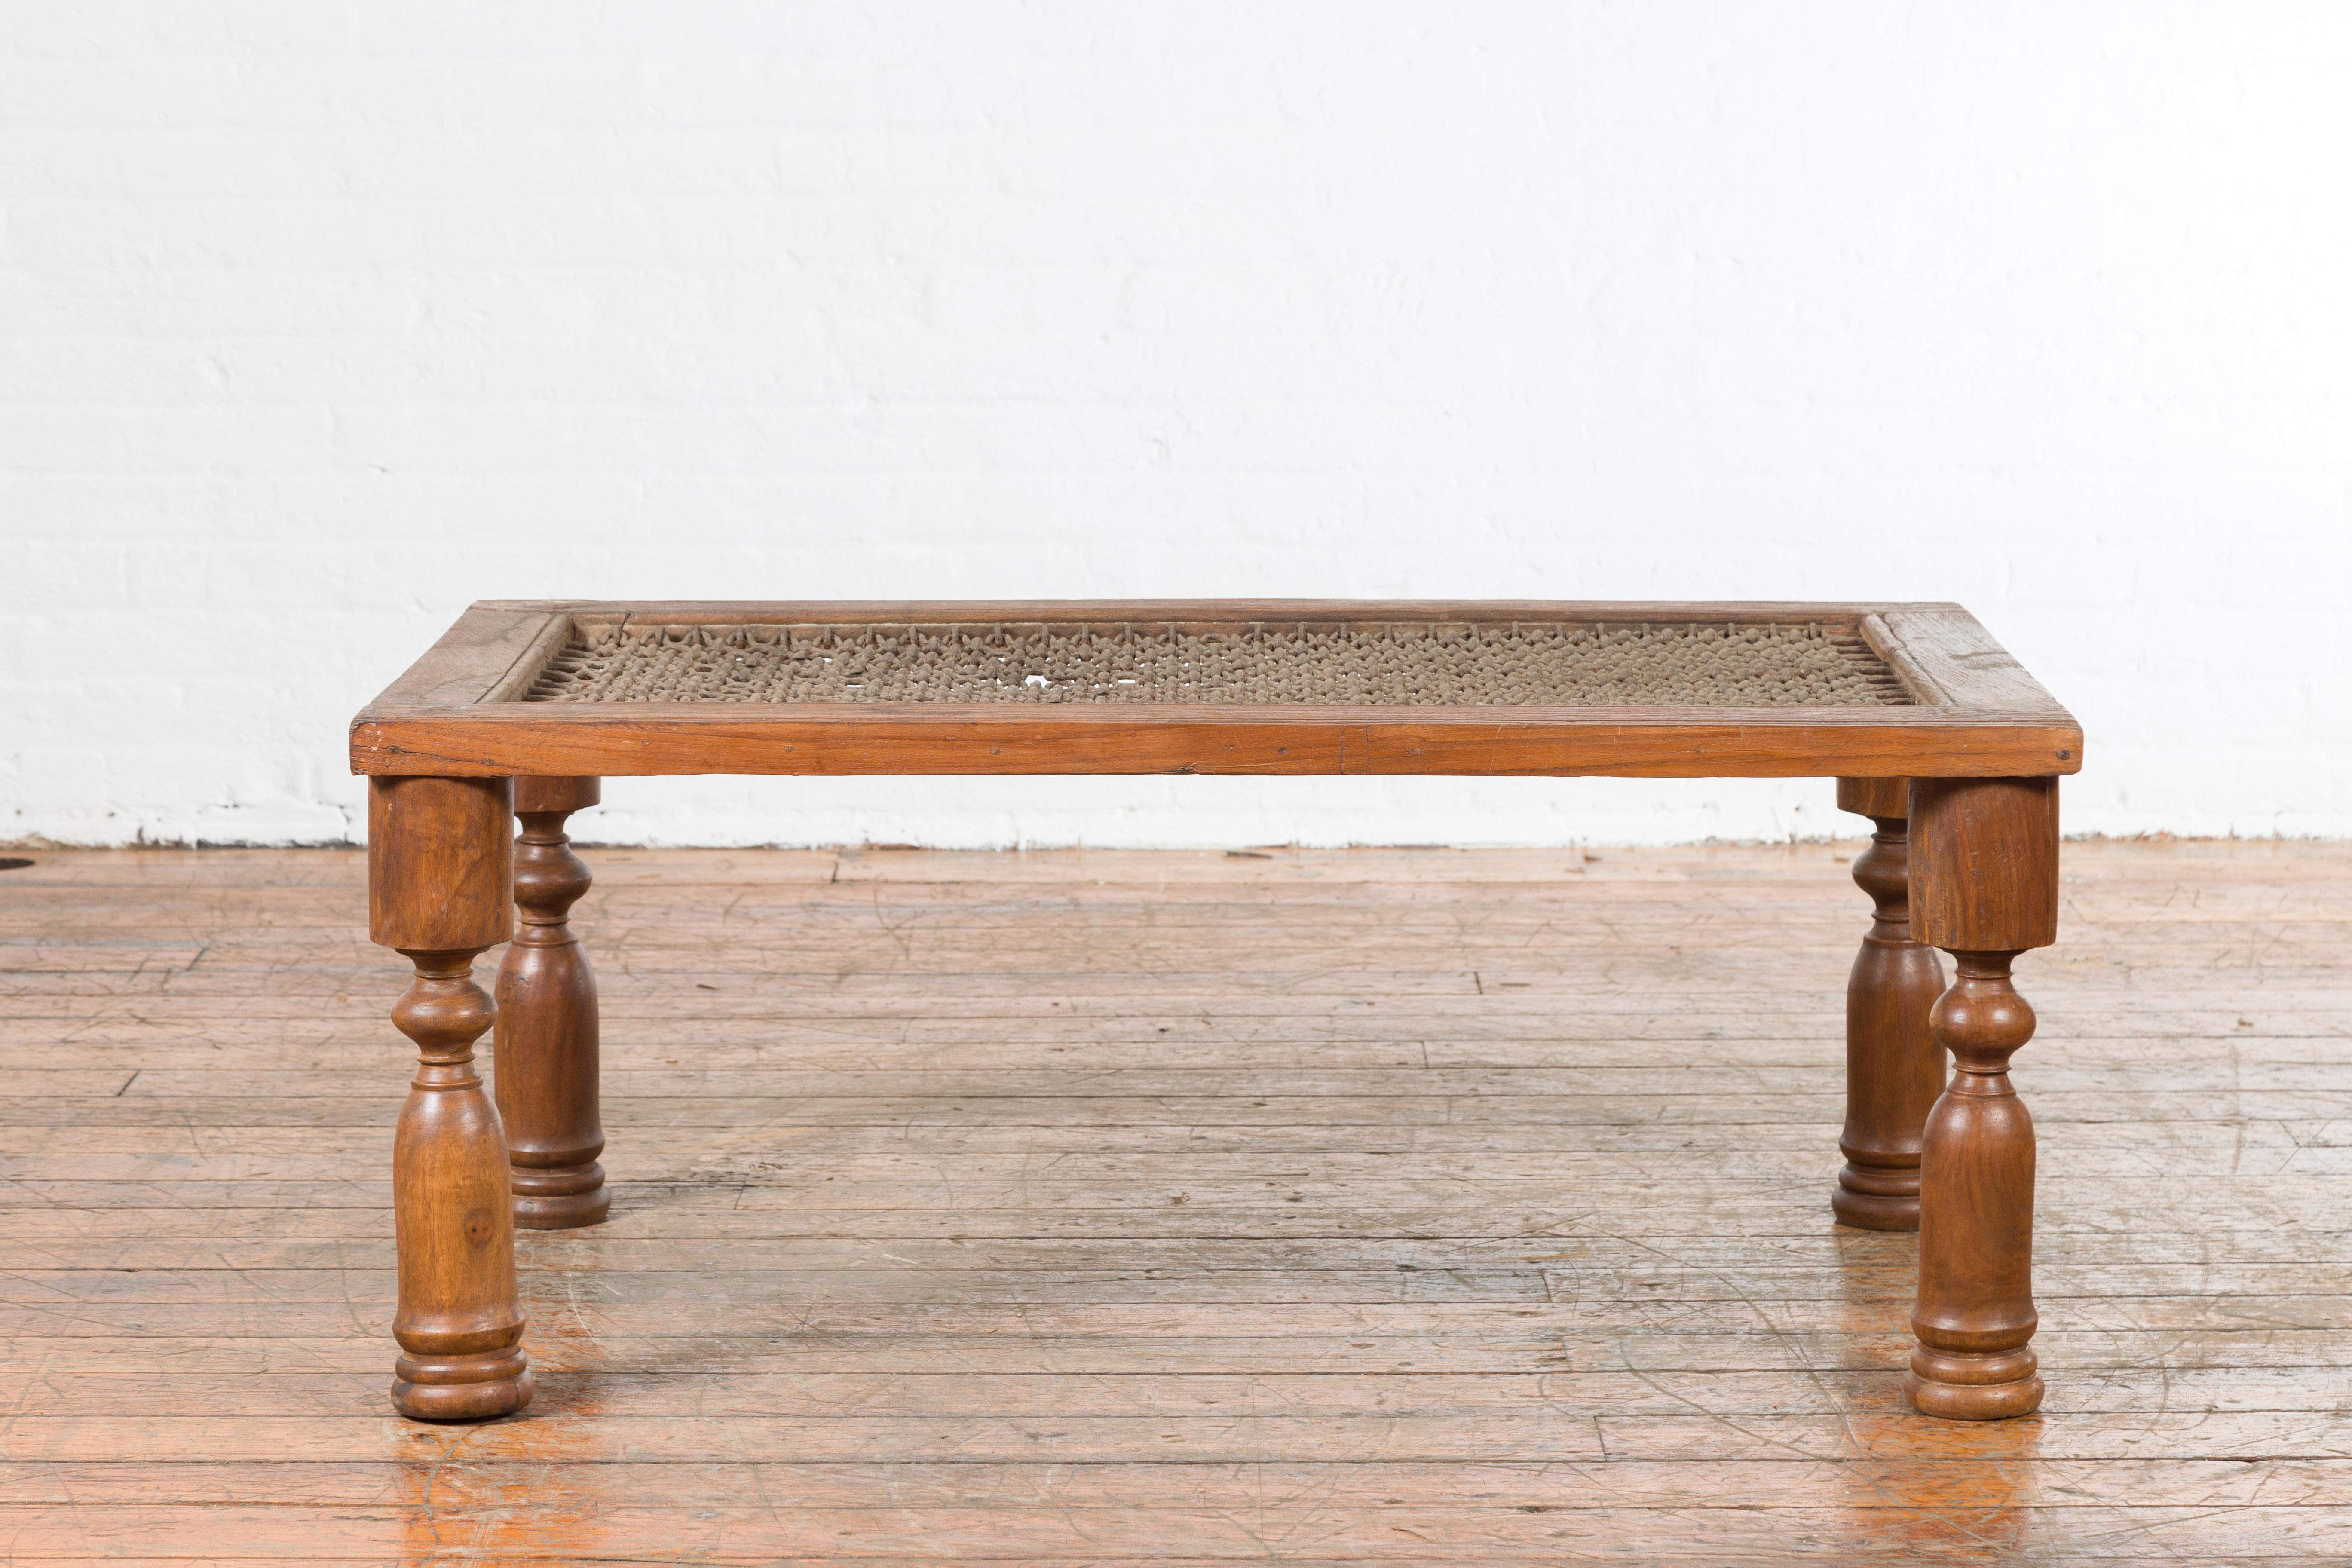 An antique Indian window grate from the 19th century, made into a coffee table with baluster legs. Created in India during the 19th century, this coffee table features an iron grate top with geometric patterns, resting on four turned baluster legs.